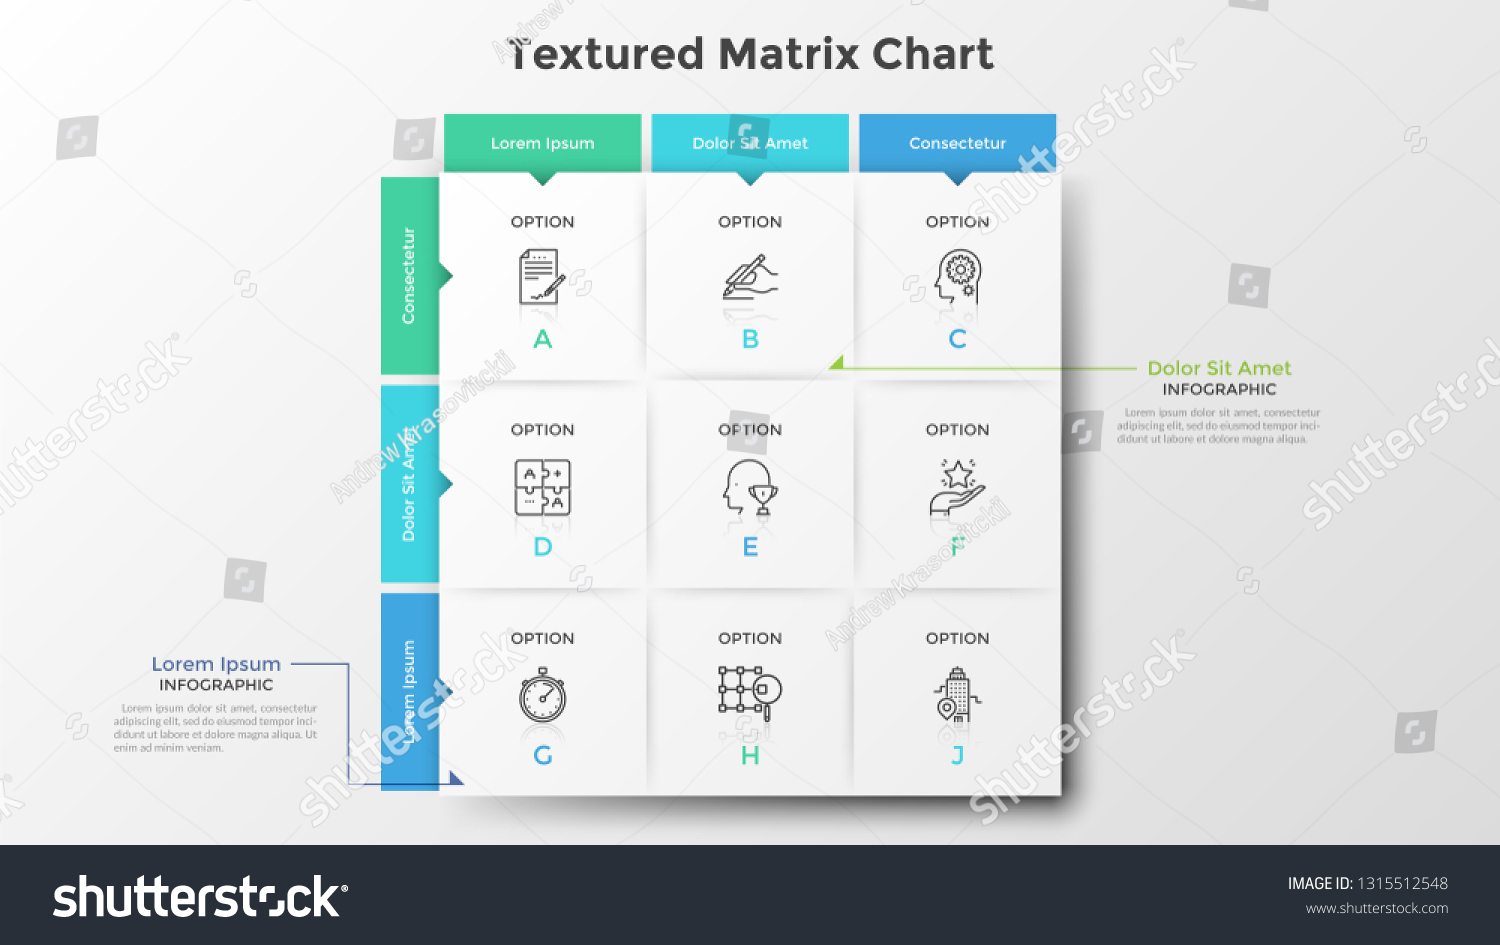 Square matrix chart or table. Nine paper white rectangular elements with thin line icons and letters inside, text boxes. Clean infographic design template. Vector illustration for presentation. #1315512548